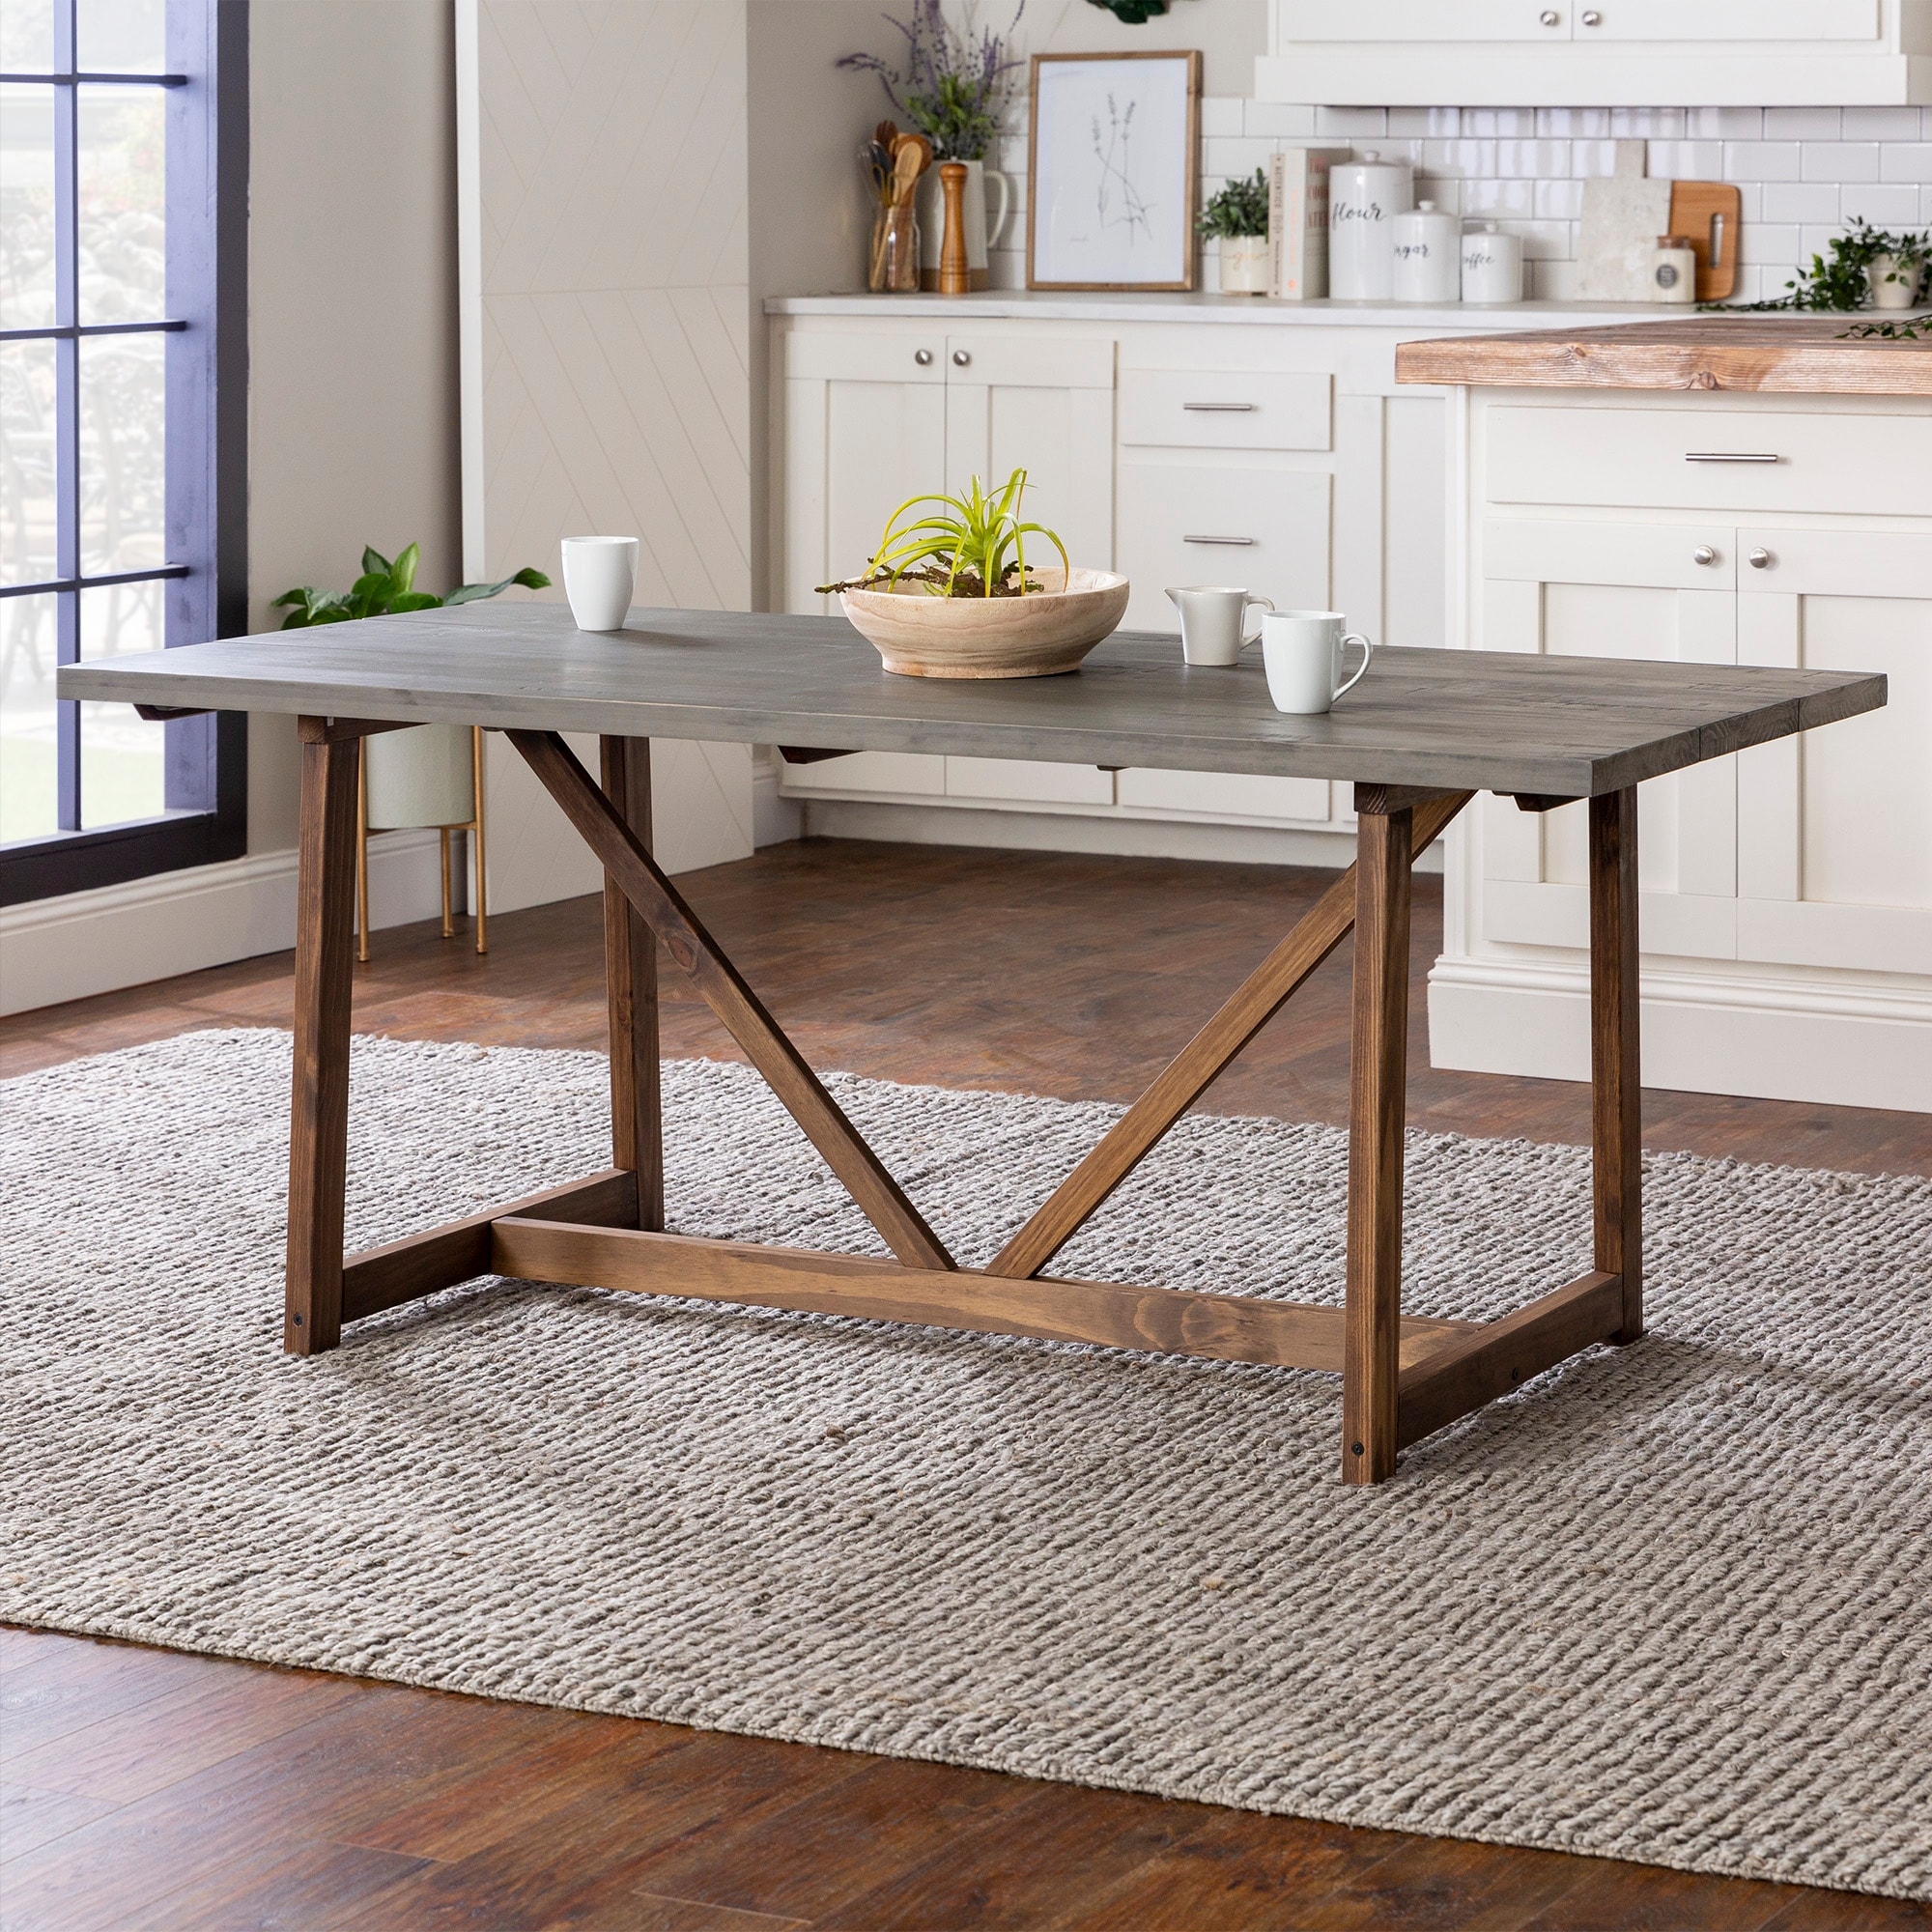 The Gray Barn 72 Inch Solid Wood Trestle Dining Table On Sale Overstock 31288561